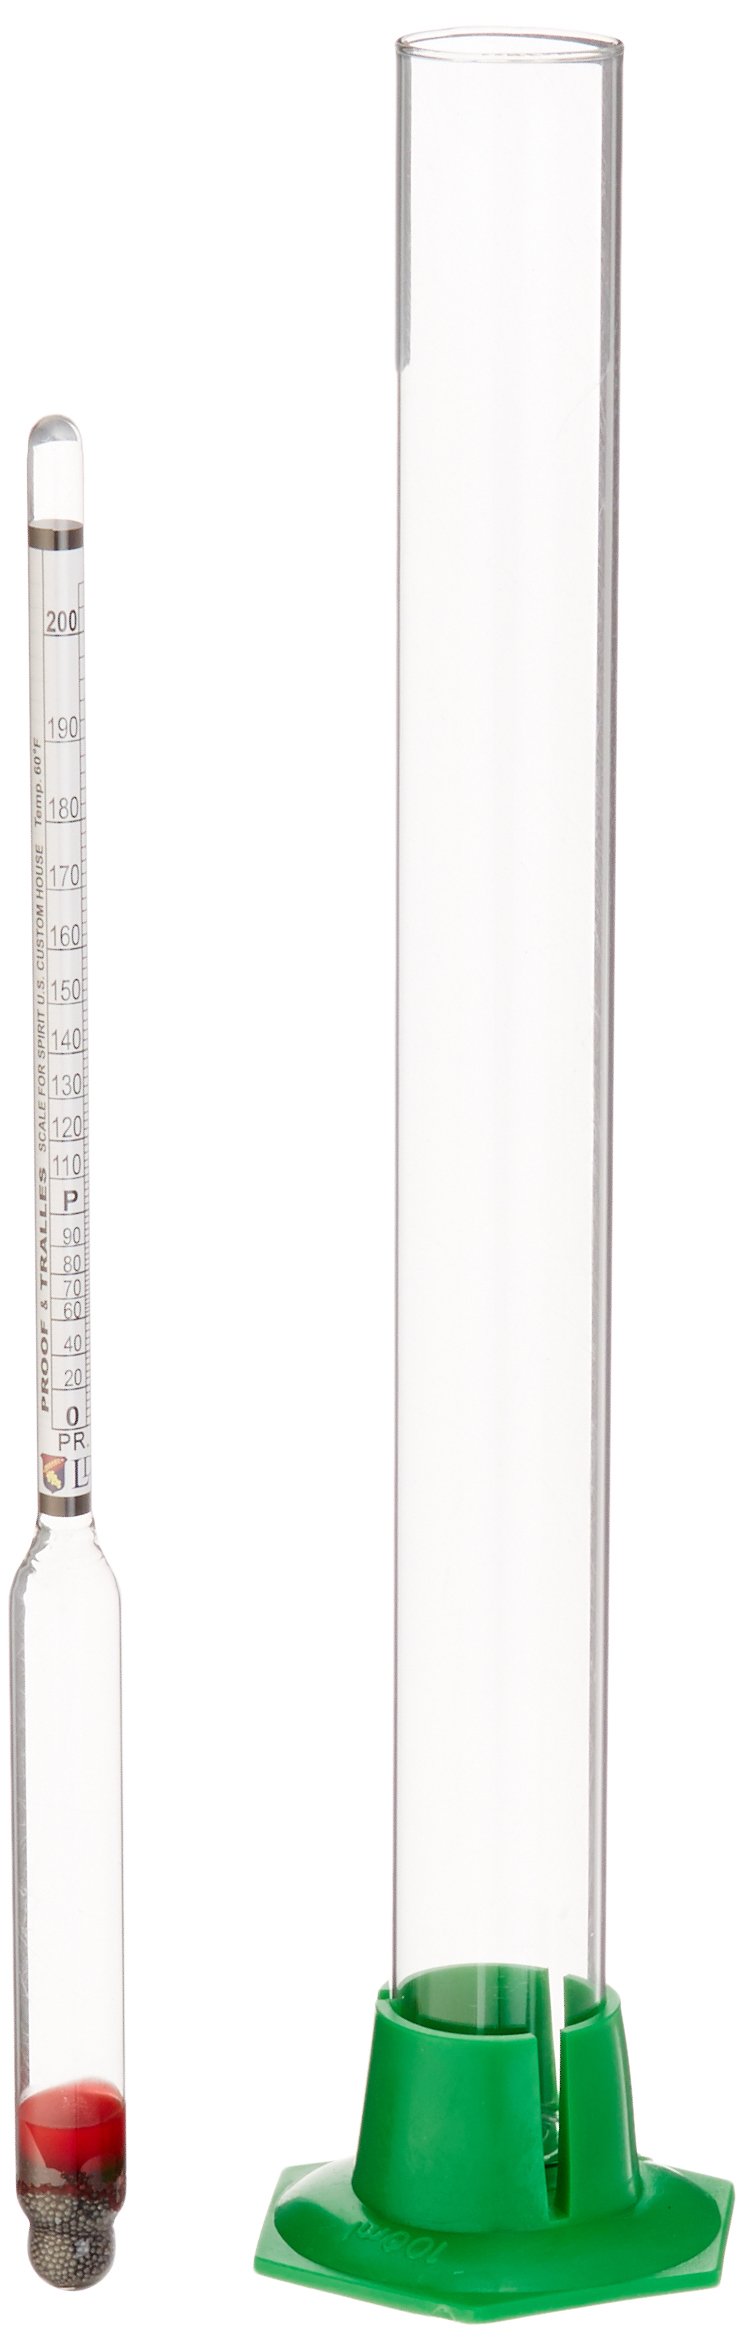 Naruekrit R3-Xikq-Ad0G Proof And Tralle Hydrometer With 12 Glass Test Jar